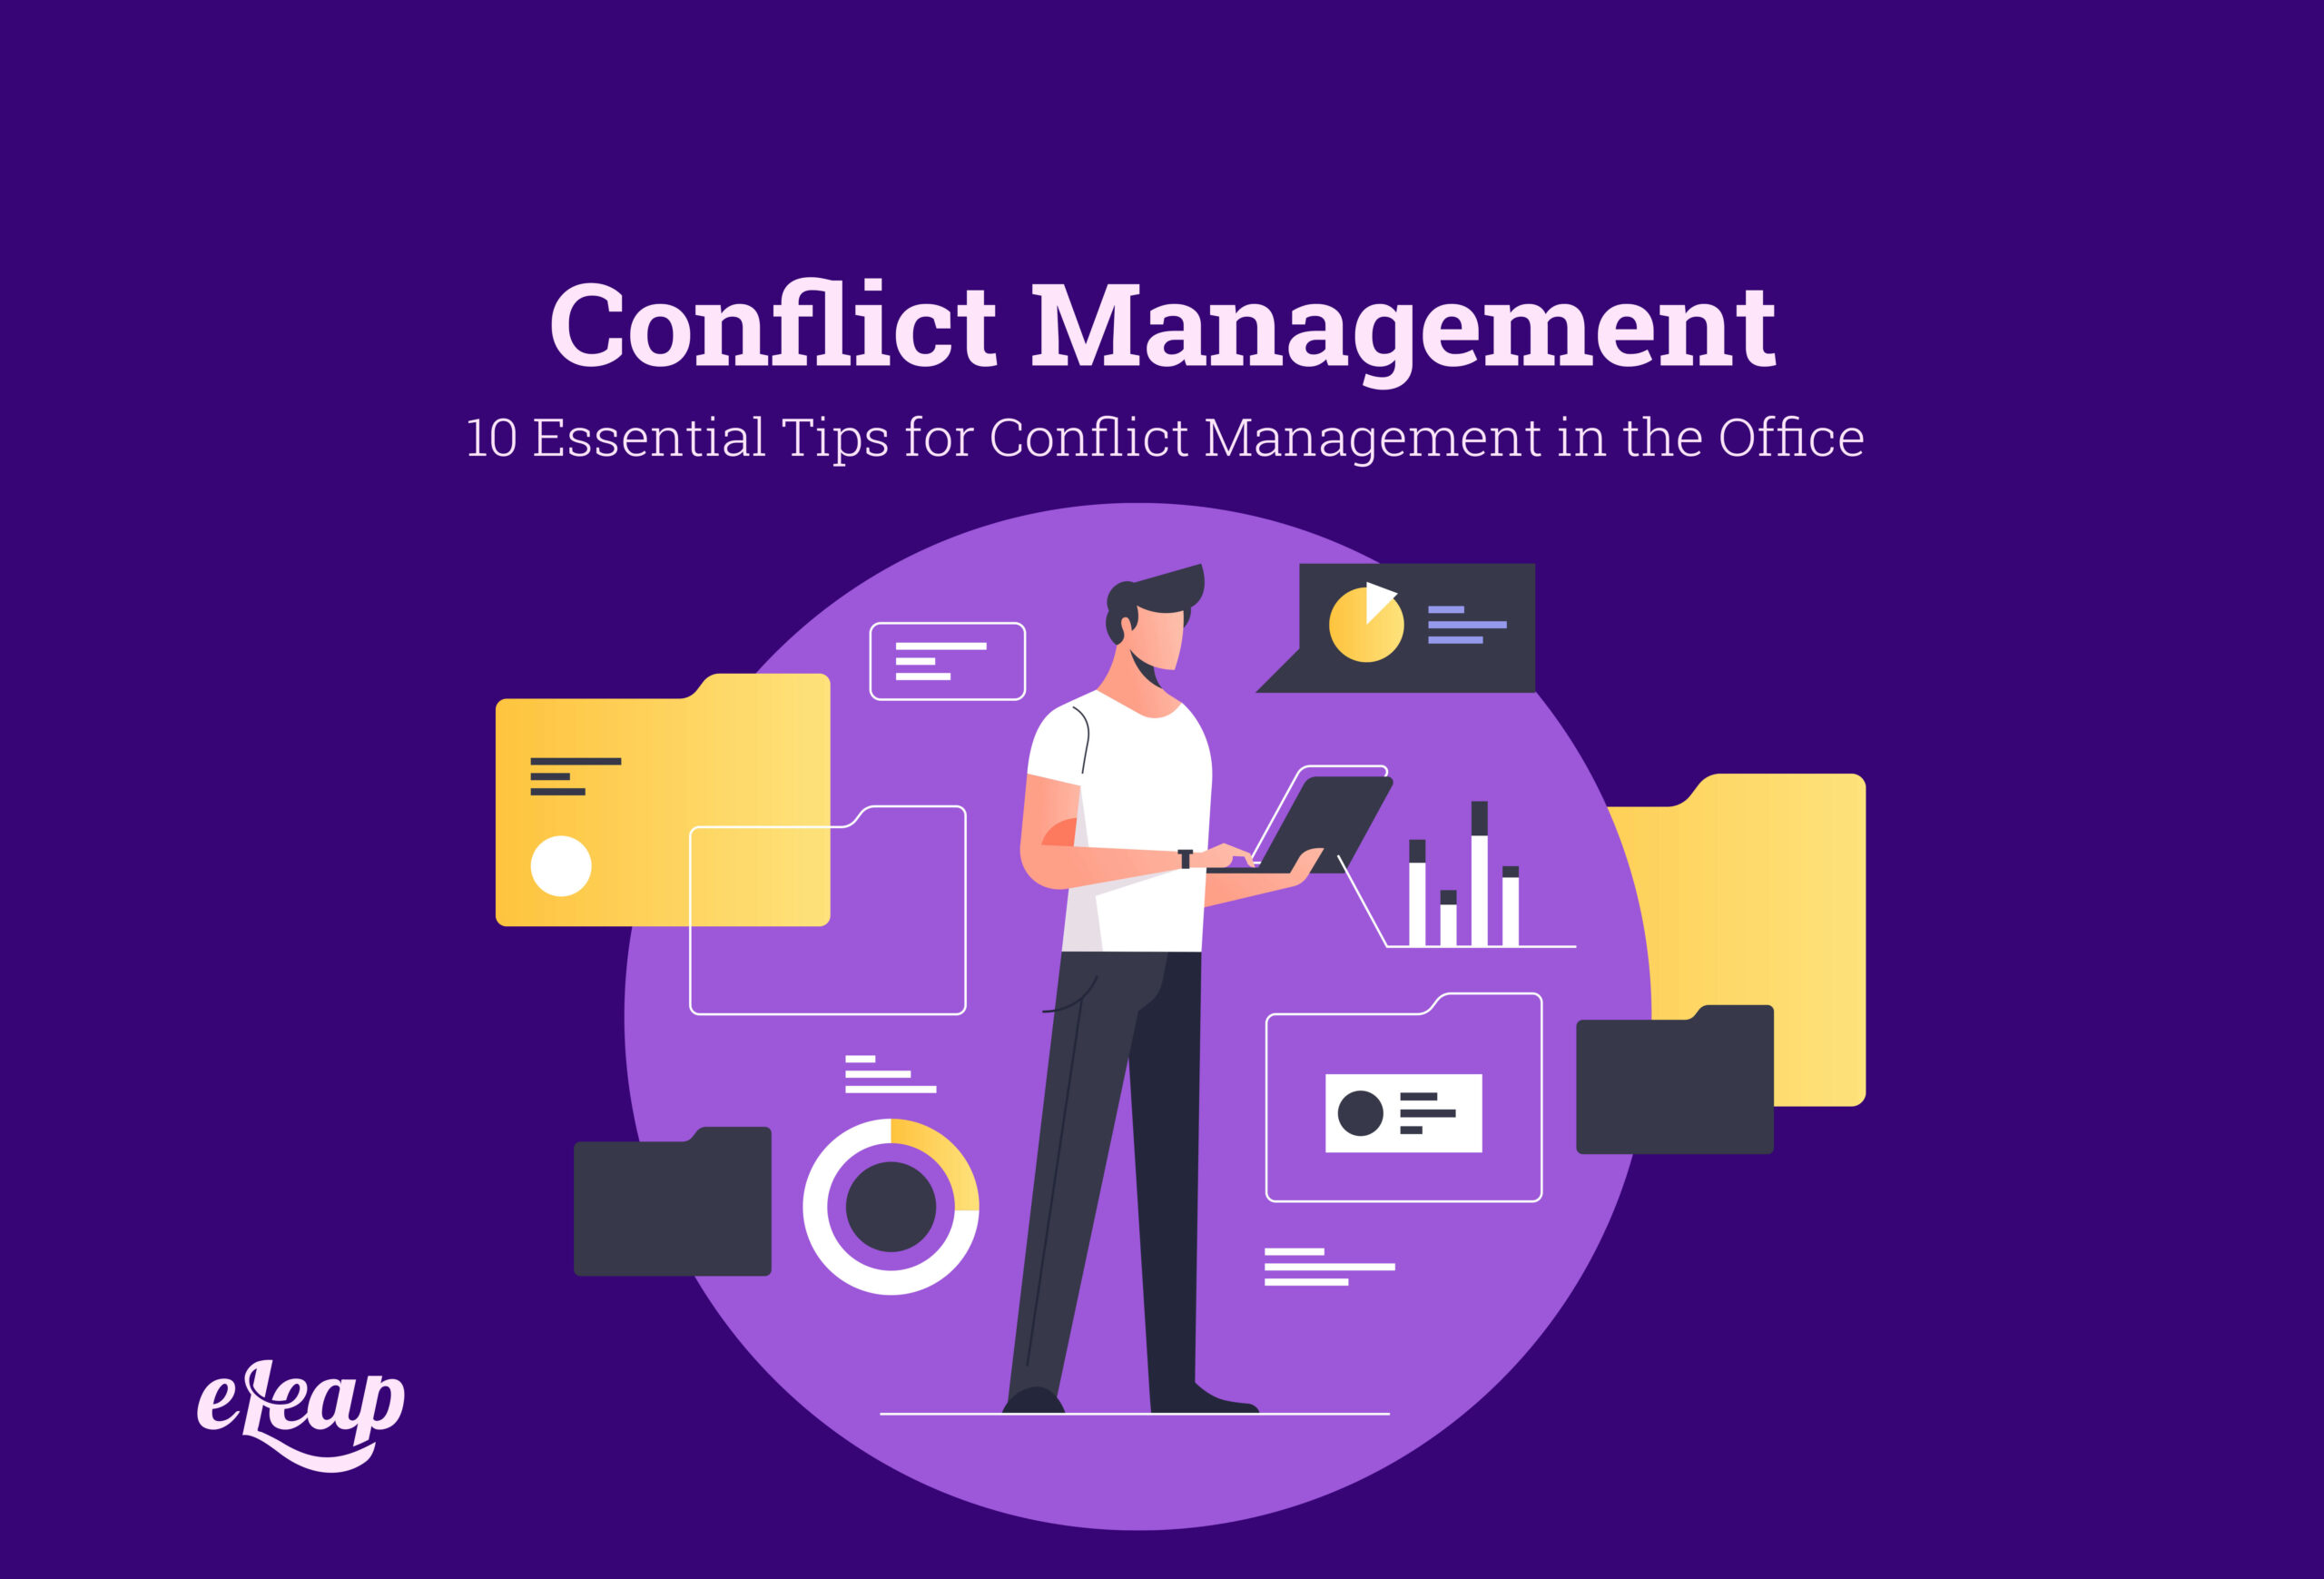 10 Essential Tips for Conflict Management in the Office